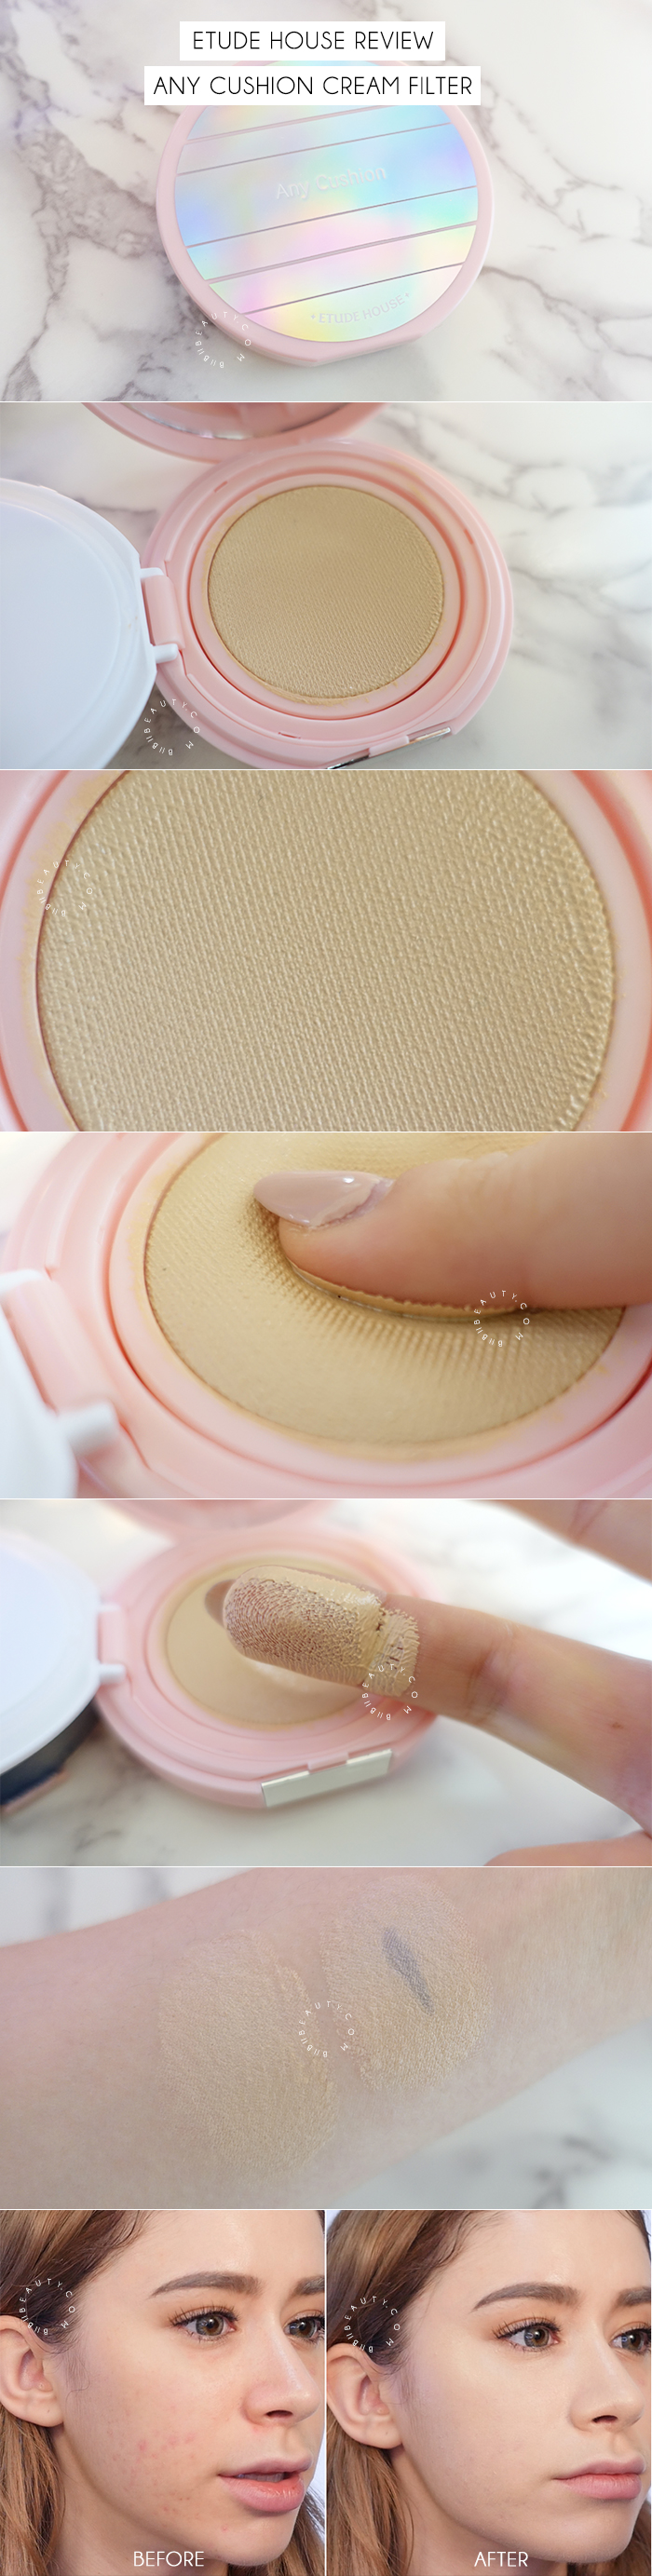 ETUDE HOUSE ANY CUSHION CREAM FILTER REVIEW